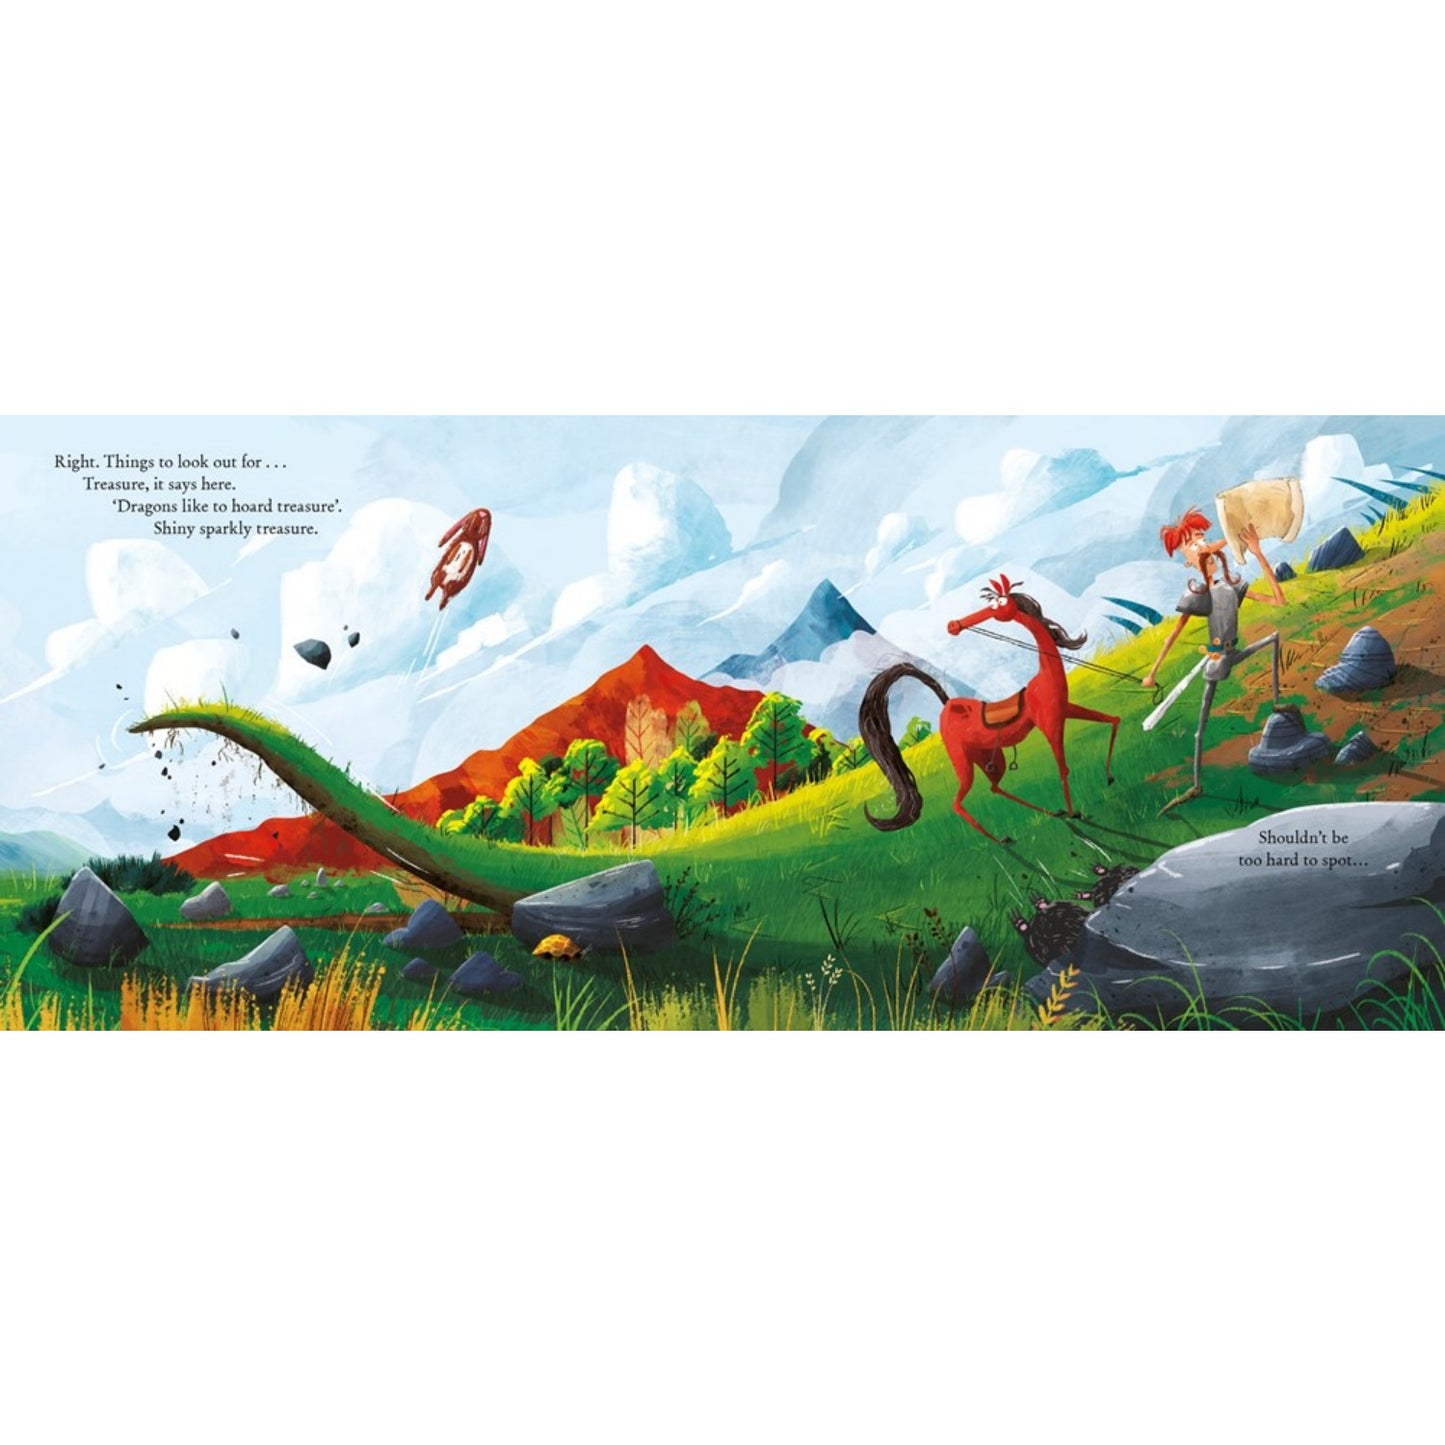 Here Be Dragons! | Children's Book on Adventures